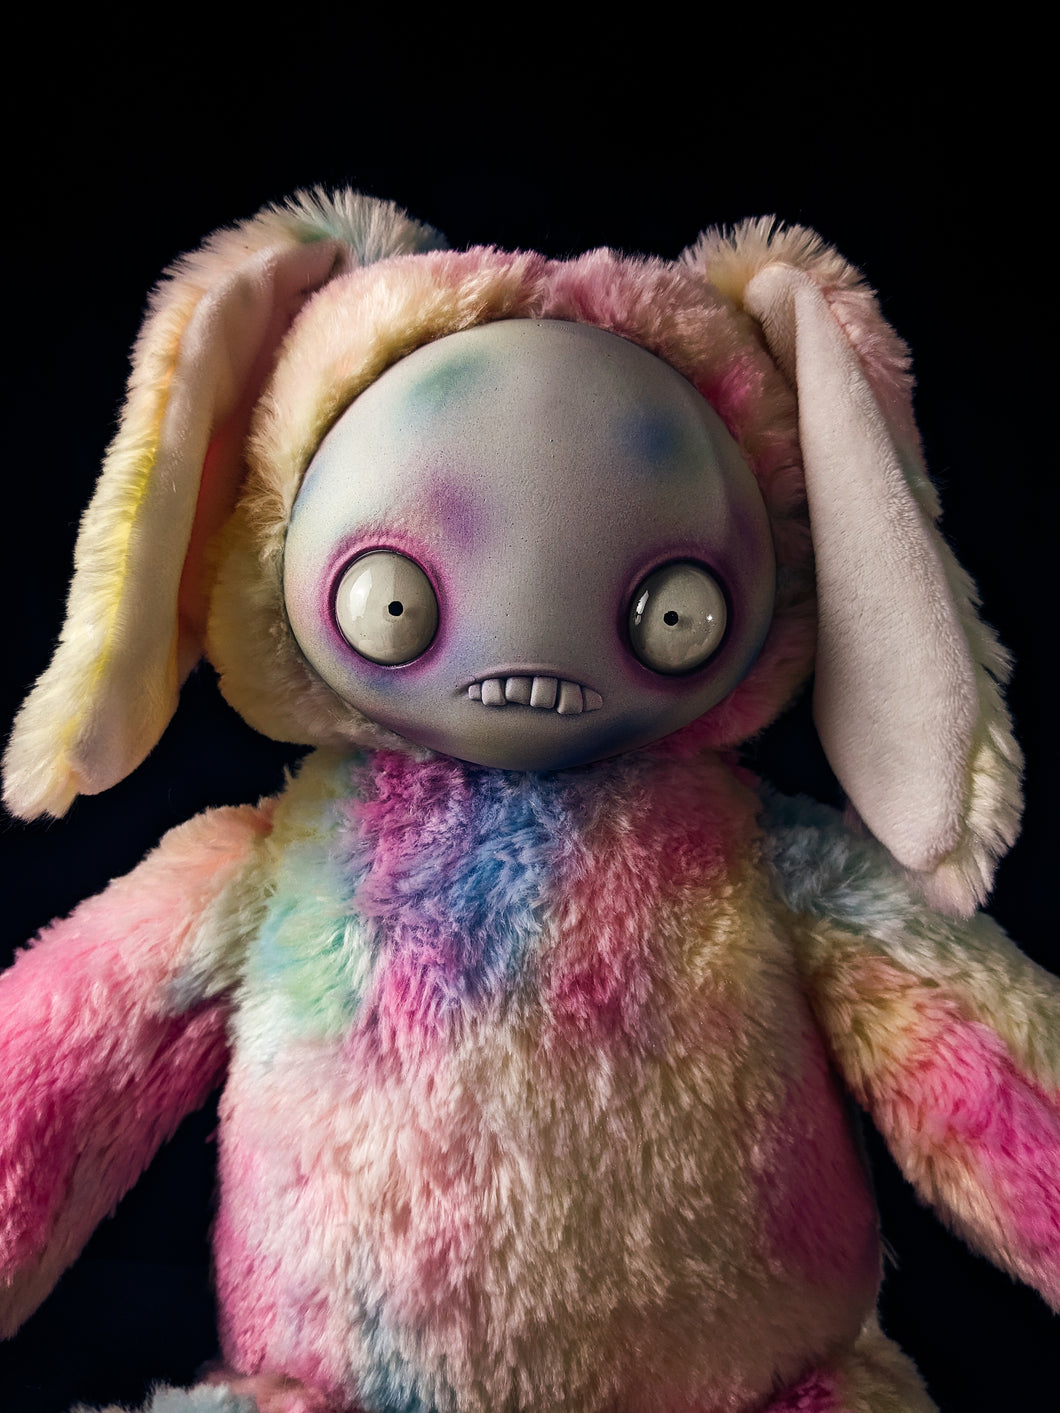 Polka-Panic: JITTERS - CRYPTCRITS Handcrafted Creepy Monster Art Doll Plush Toy for Unhinged Individuals